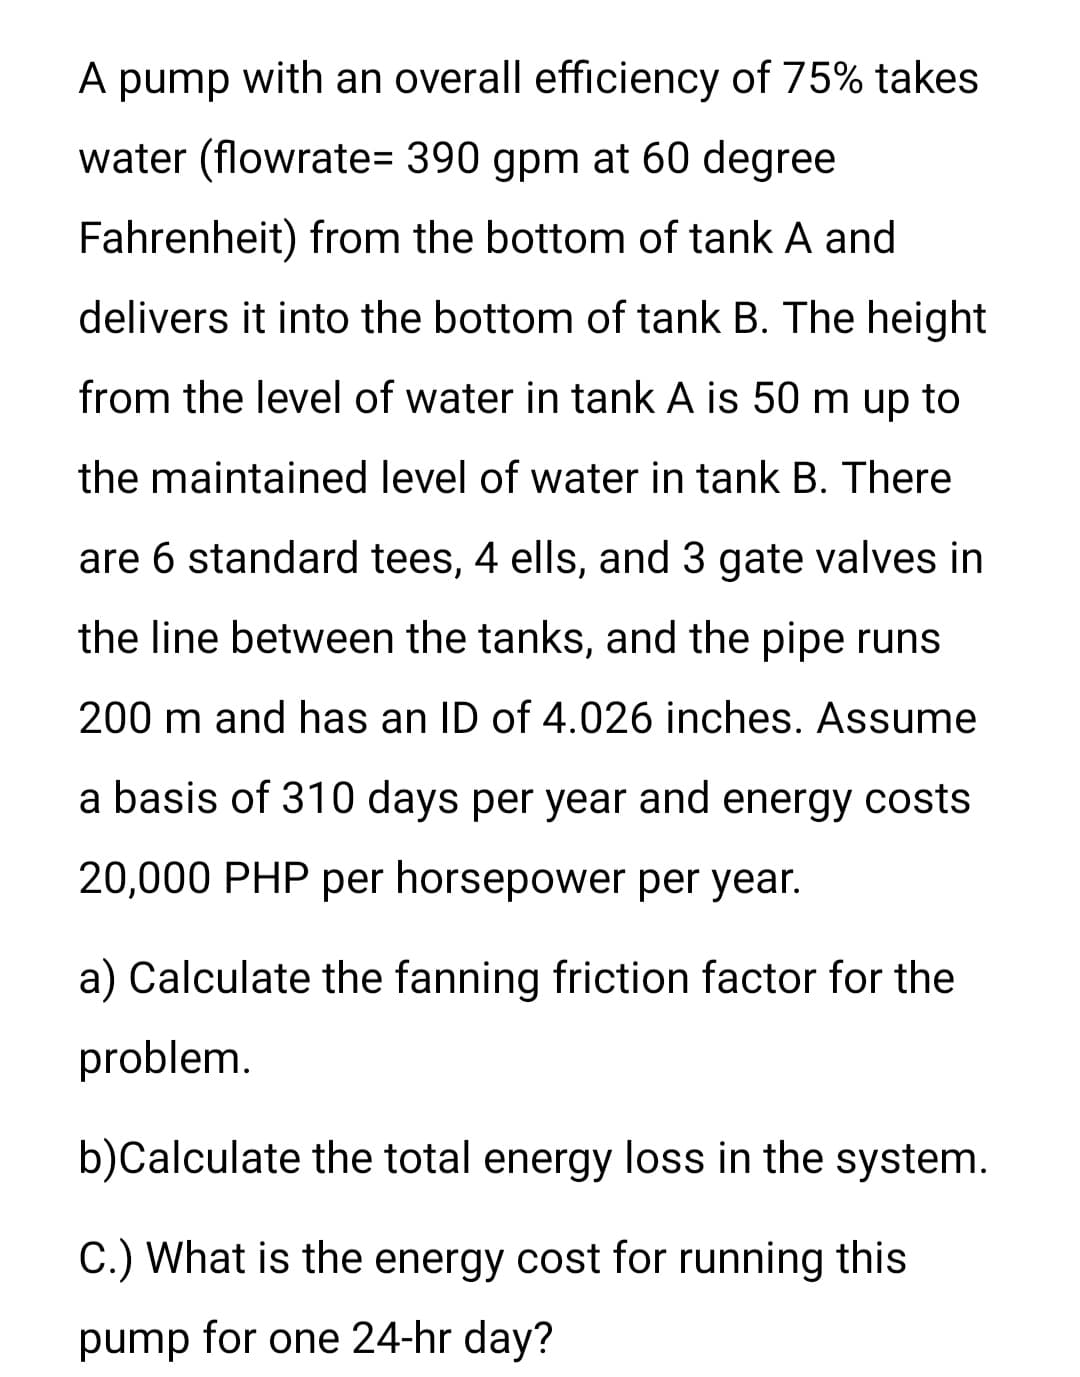 A pump with an overall efficiency of 75% takes
water (flowrate= 390 gpm at 60 degree
Fahrenheit) from the bottom of tank A and
delivers it into the bottom of tank B. The height
from the level of water in tank A is 50 m up to
the maintained level of water in tank B. There
are 6 standard tees, 4 ells, and 3 gate valves in
the line between the tanks, and the pipe runs
200 m and has an ID of 4.026 inches. Assume
a basis of 310 days per year and energy costs
20,000 PHP per horsepower per year.
a) Calculate the fanning friction factor for the
problem.
b)Calculate the total energy loss in the system.
C.) What is the energy cost for running this
pump for one 24-hr day?
